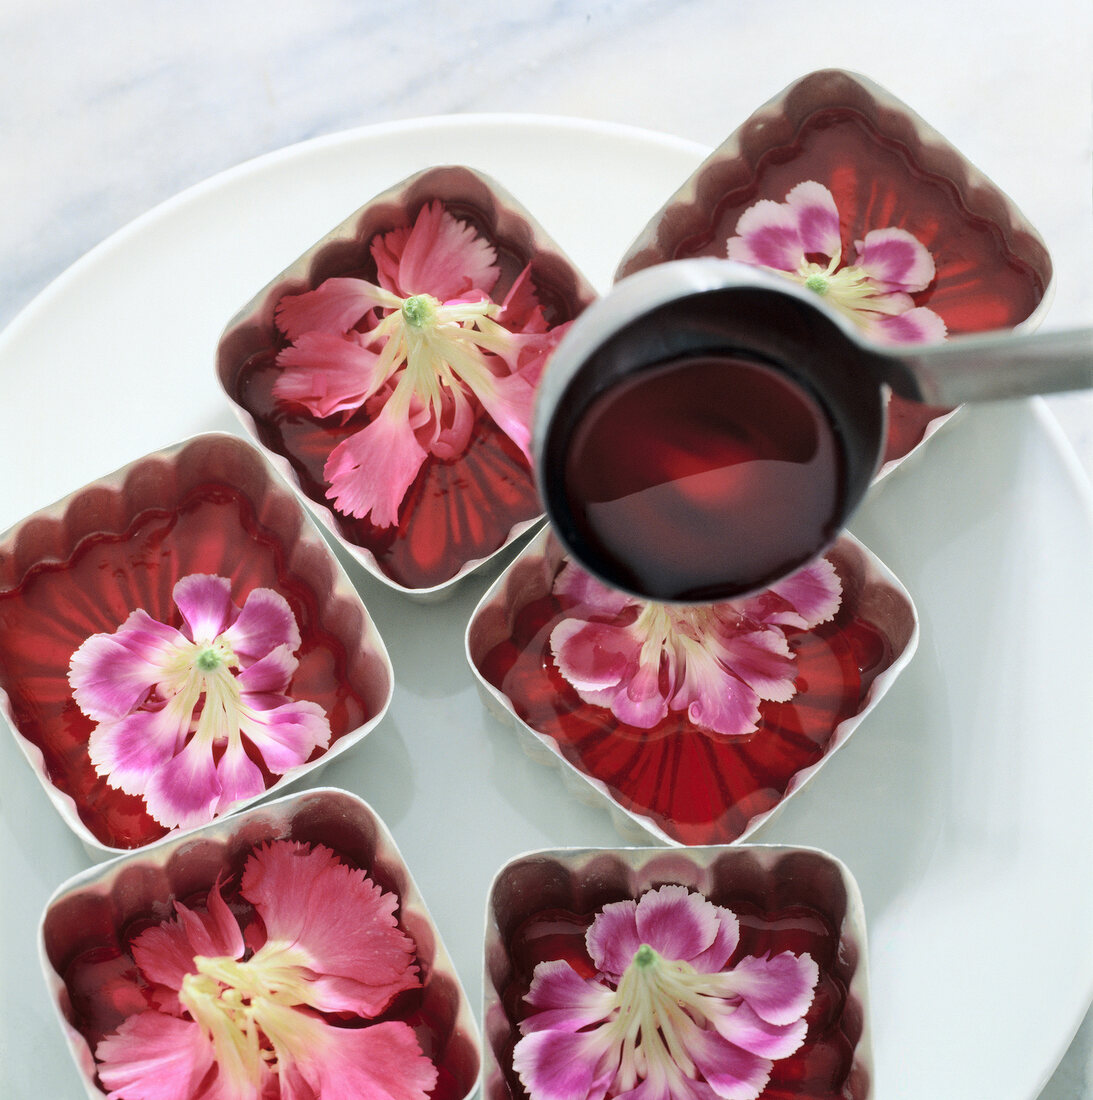 Rhubarb jelly being poured in jelly moulds with flowers on plate